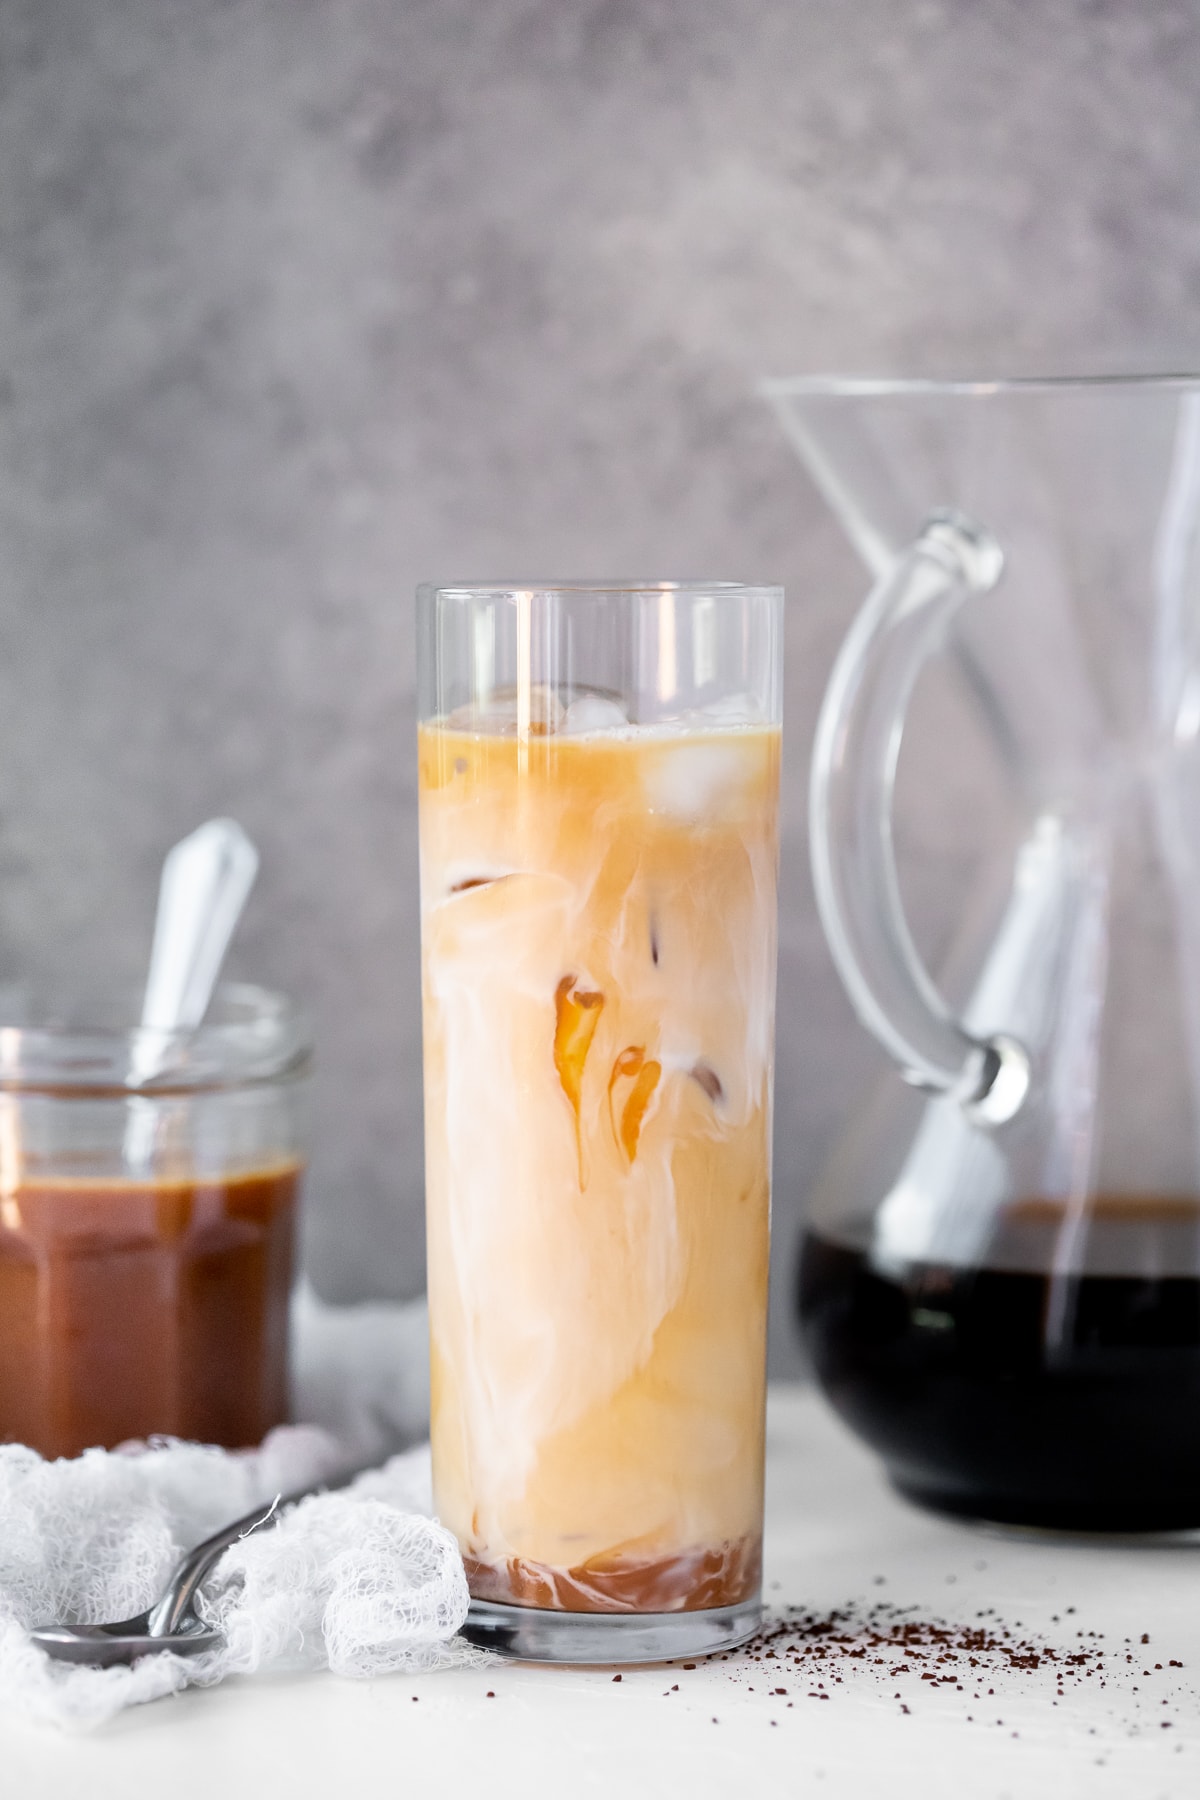 Caramel iced coffee in a tall glass, with a jar of caramel and a pour over full of coffee in the background.